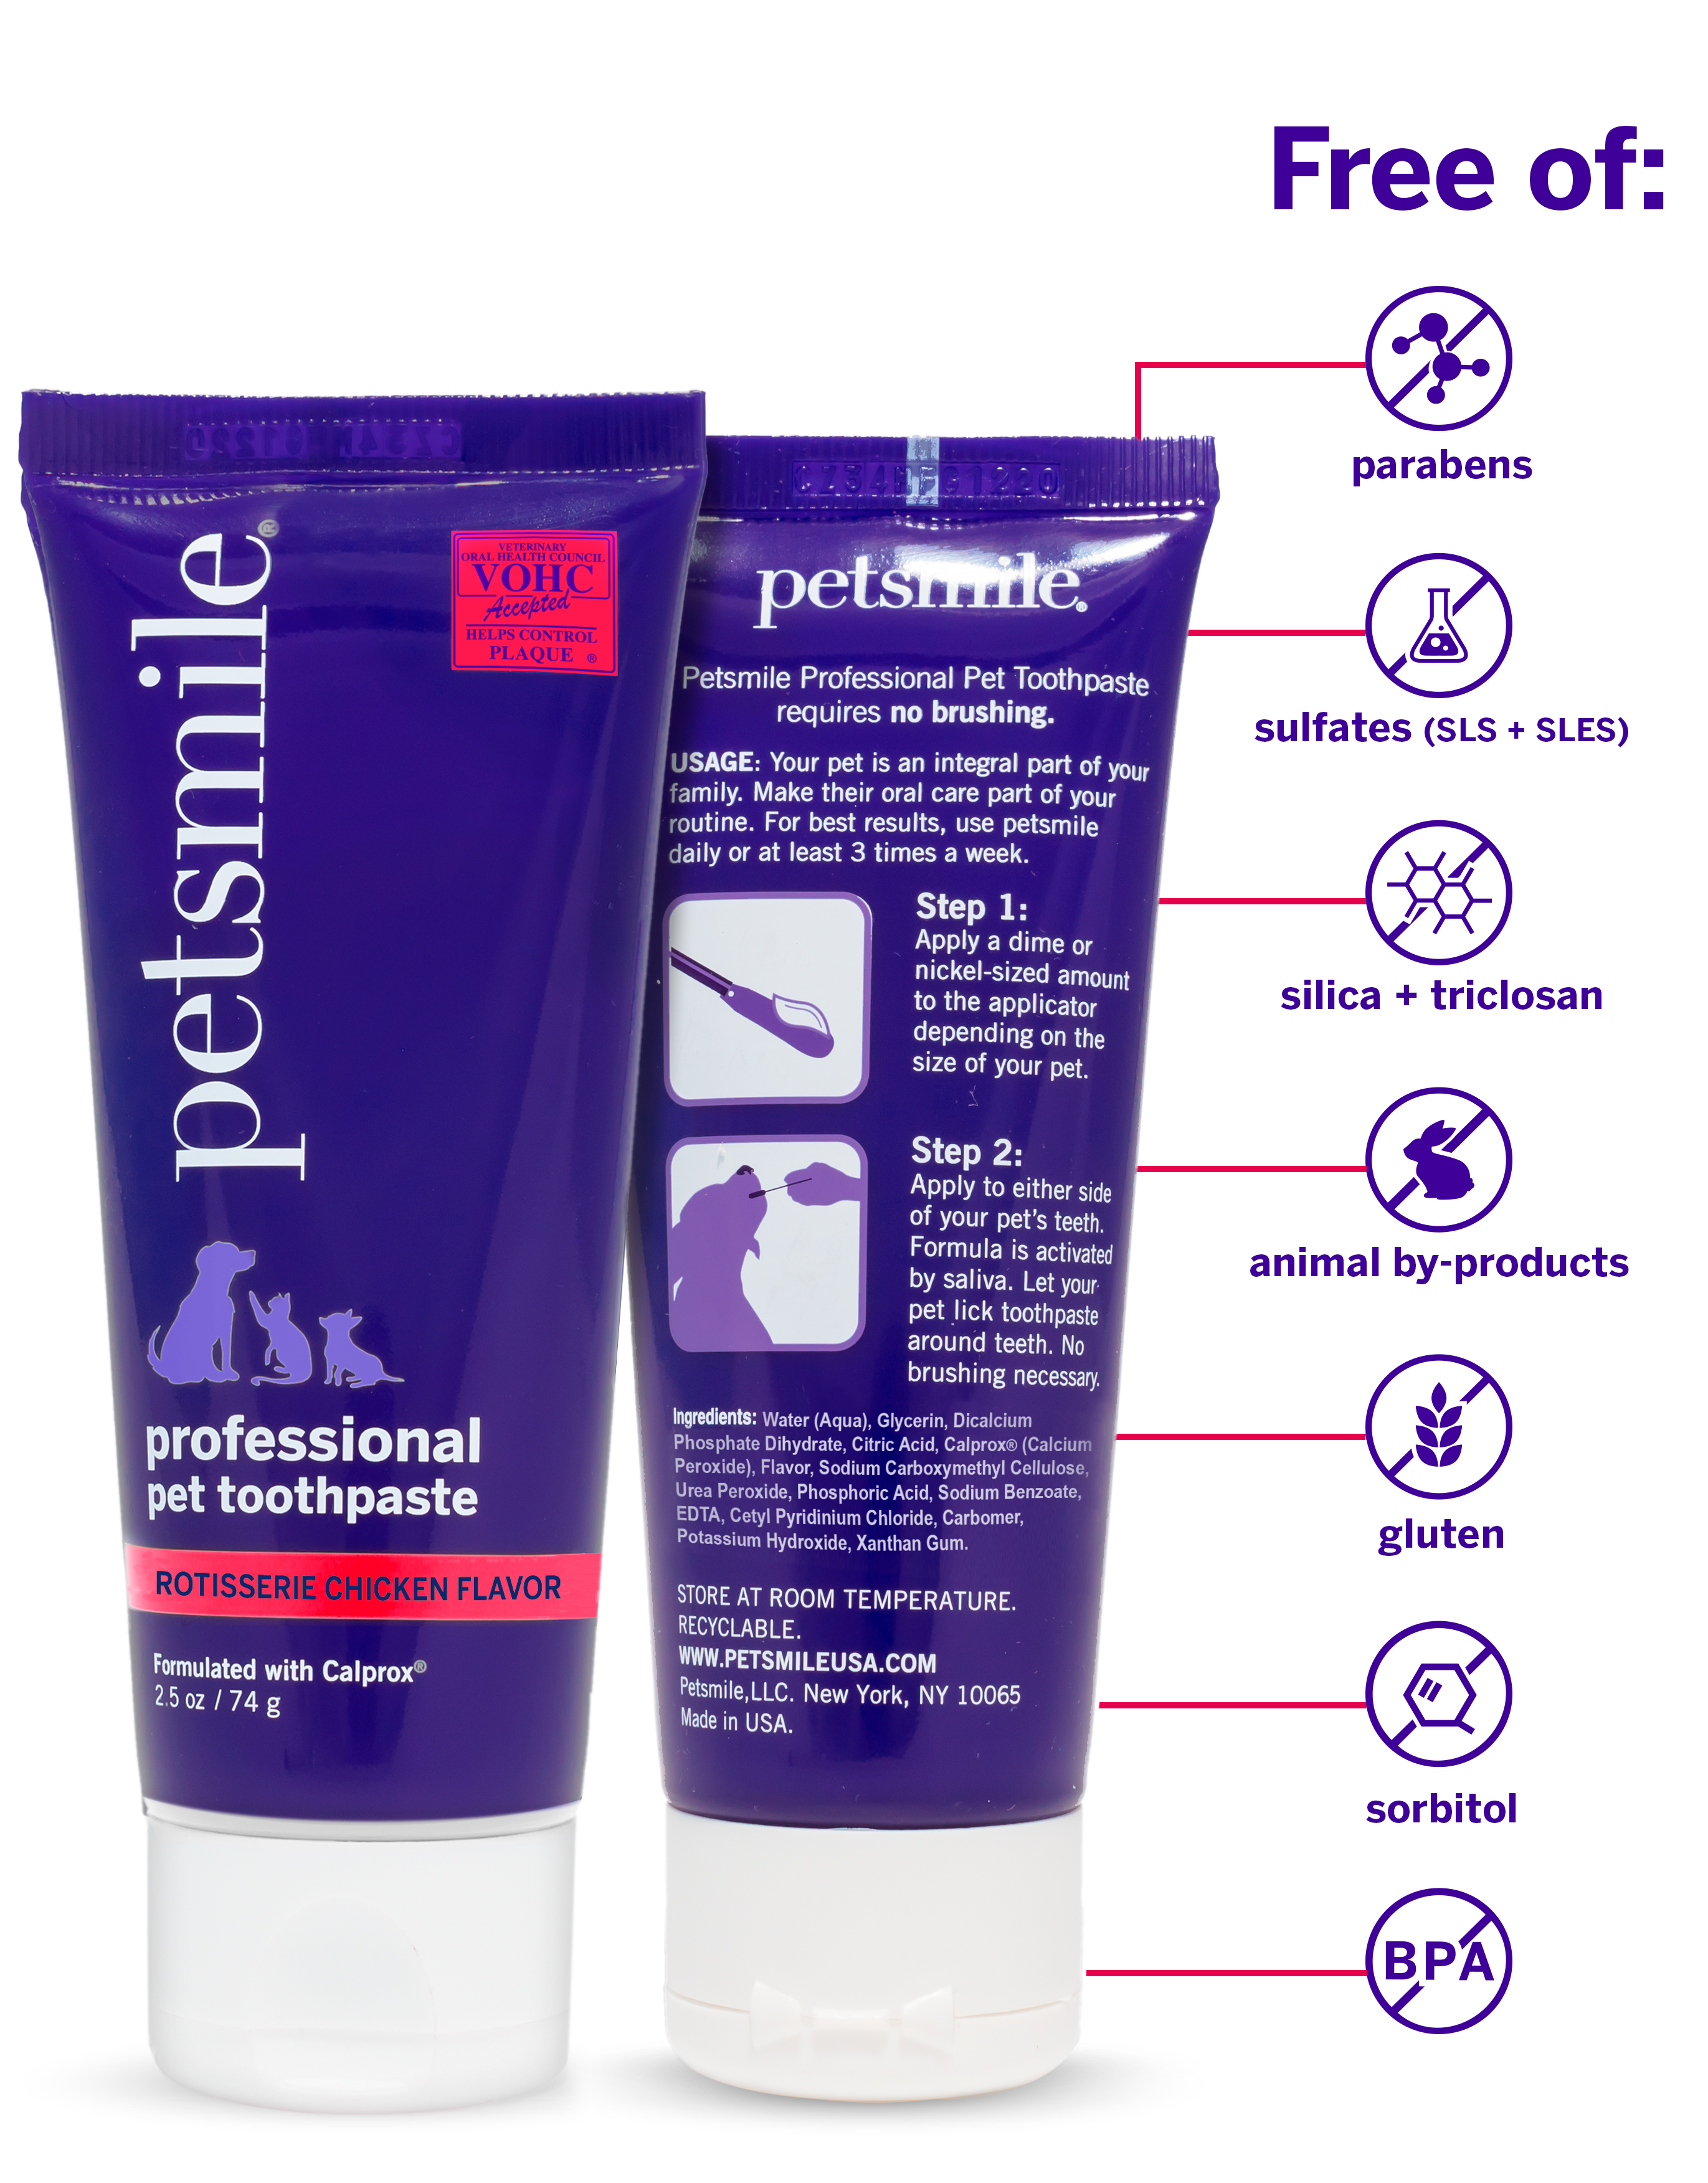 small tube of Rotisserie Chicken toothpaste , Small tube of  the best petsmile toothpaste , VOHC sealed small petsmile professional pet toothpaste , BPA-free, safe for pets , Reduce plaque and gingivitis , Safe ingredients, fresh toothpaste